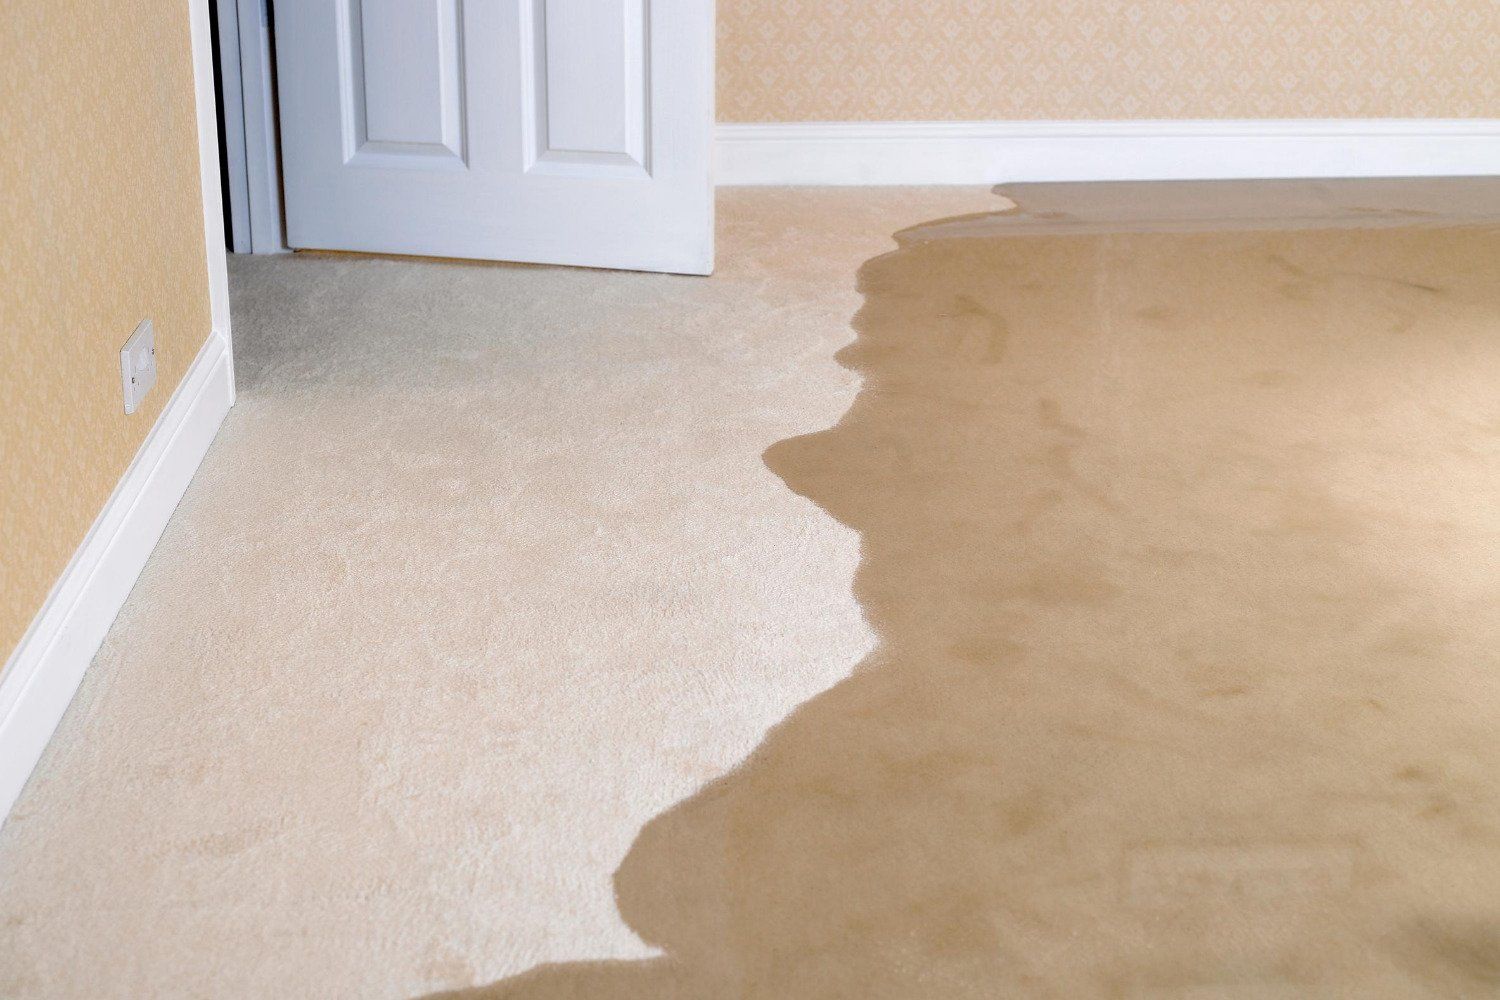 What to Do When Water Is Leaking Through Your Ceiling